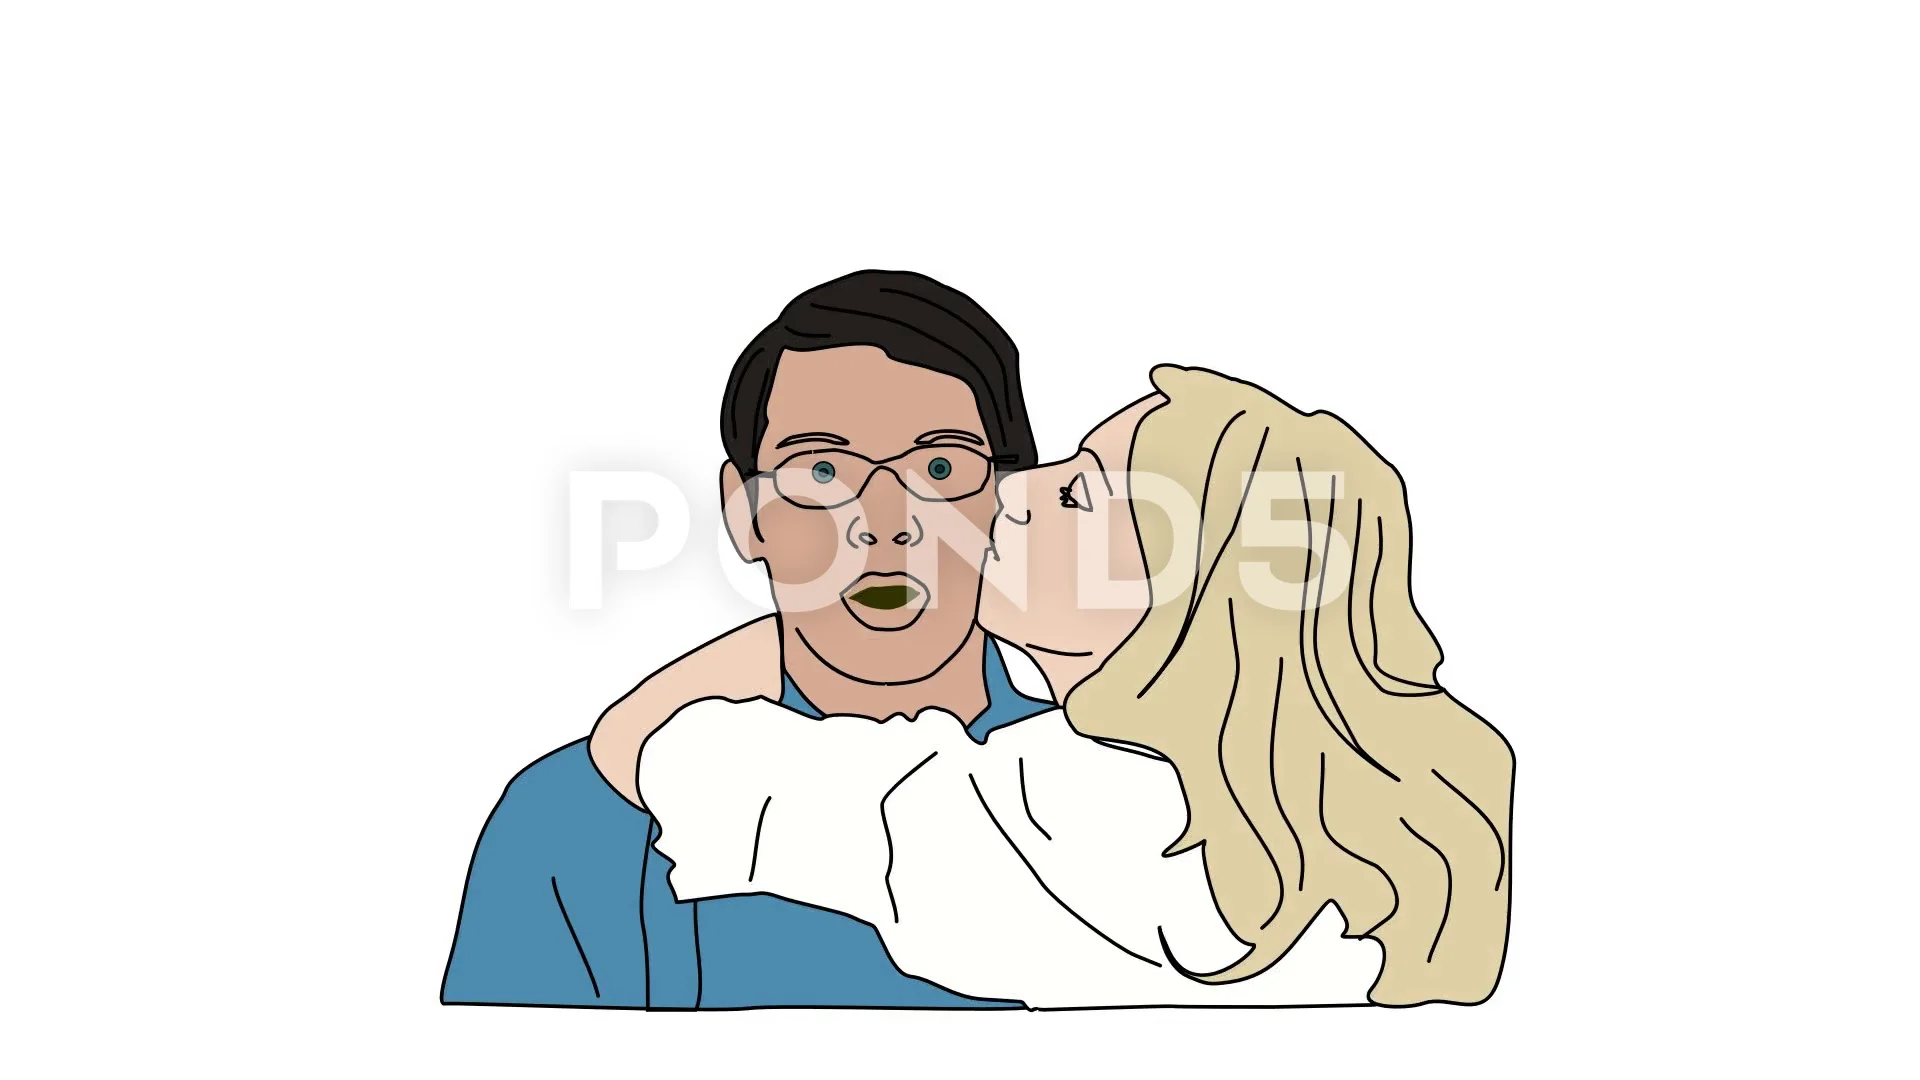 Couple Kissing Drawing Images - Free Download on Freepik